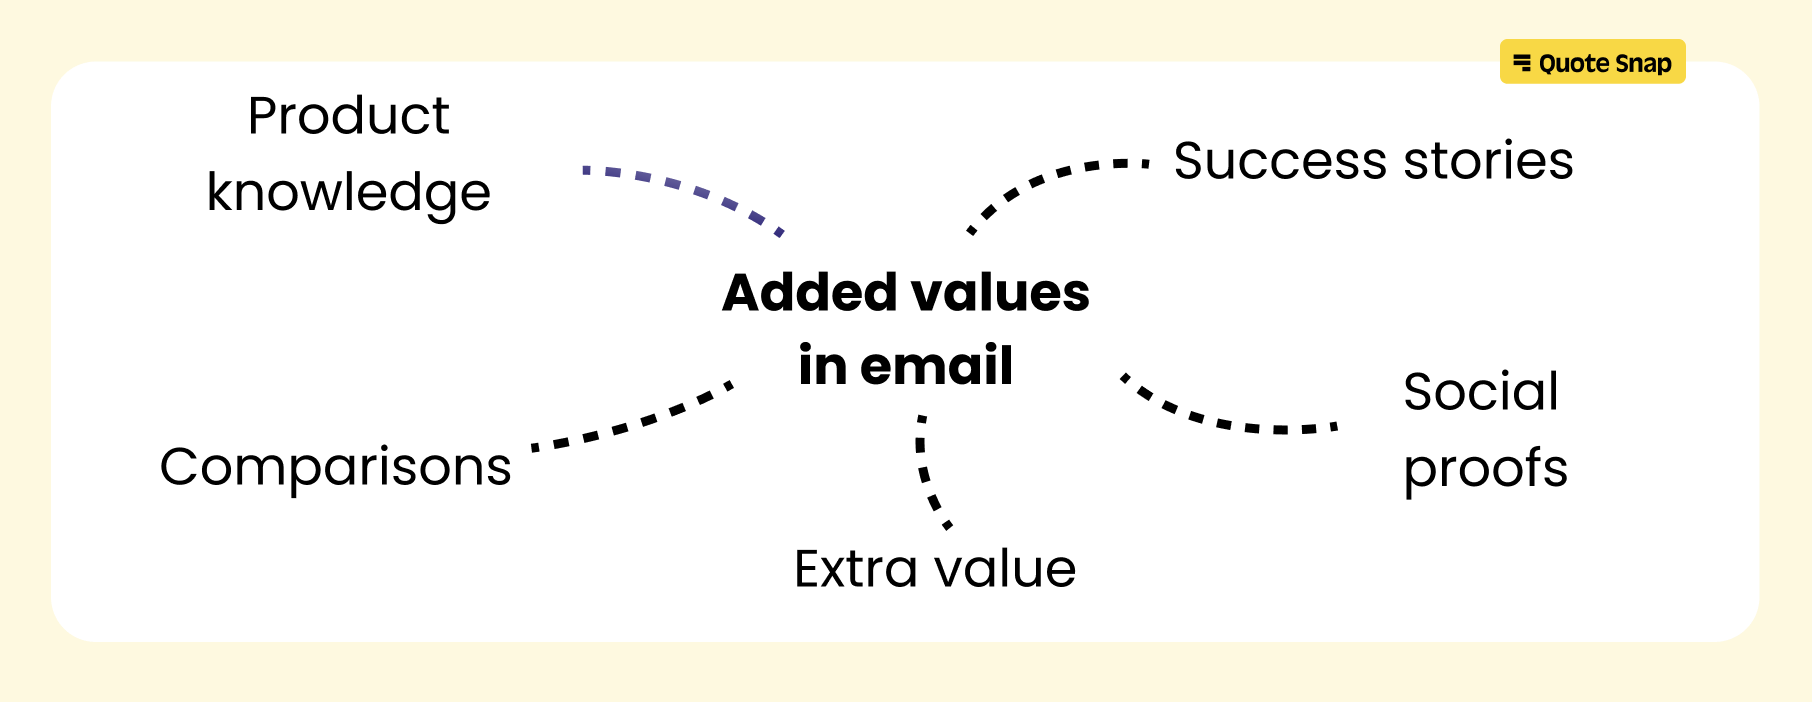 Give readers more information in the email